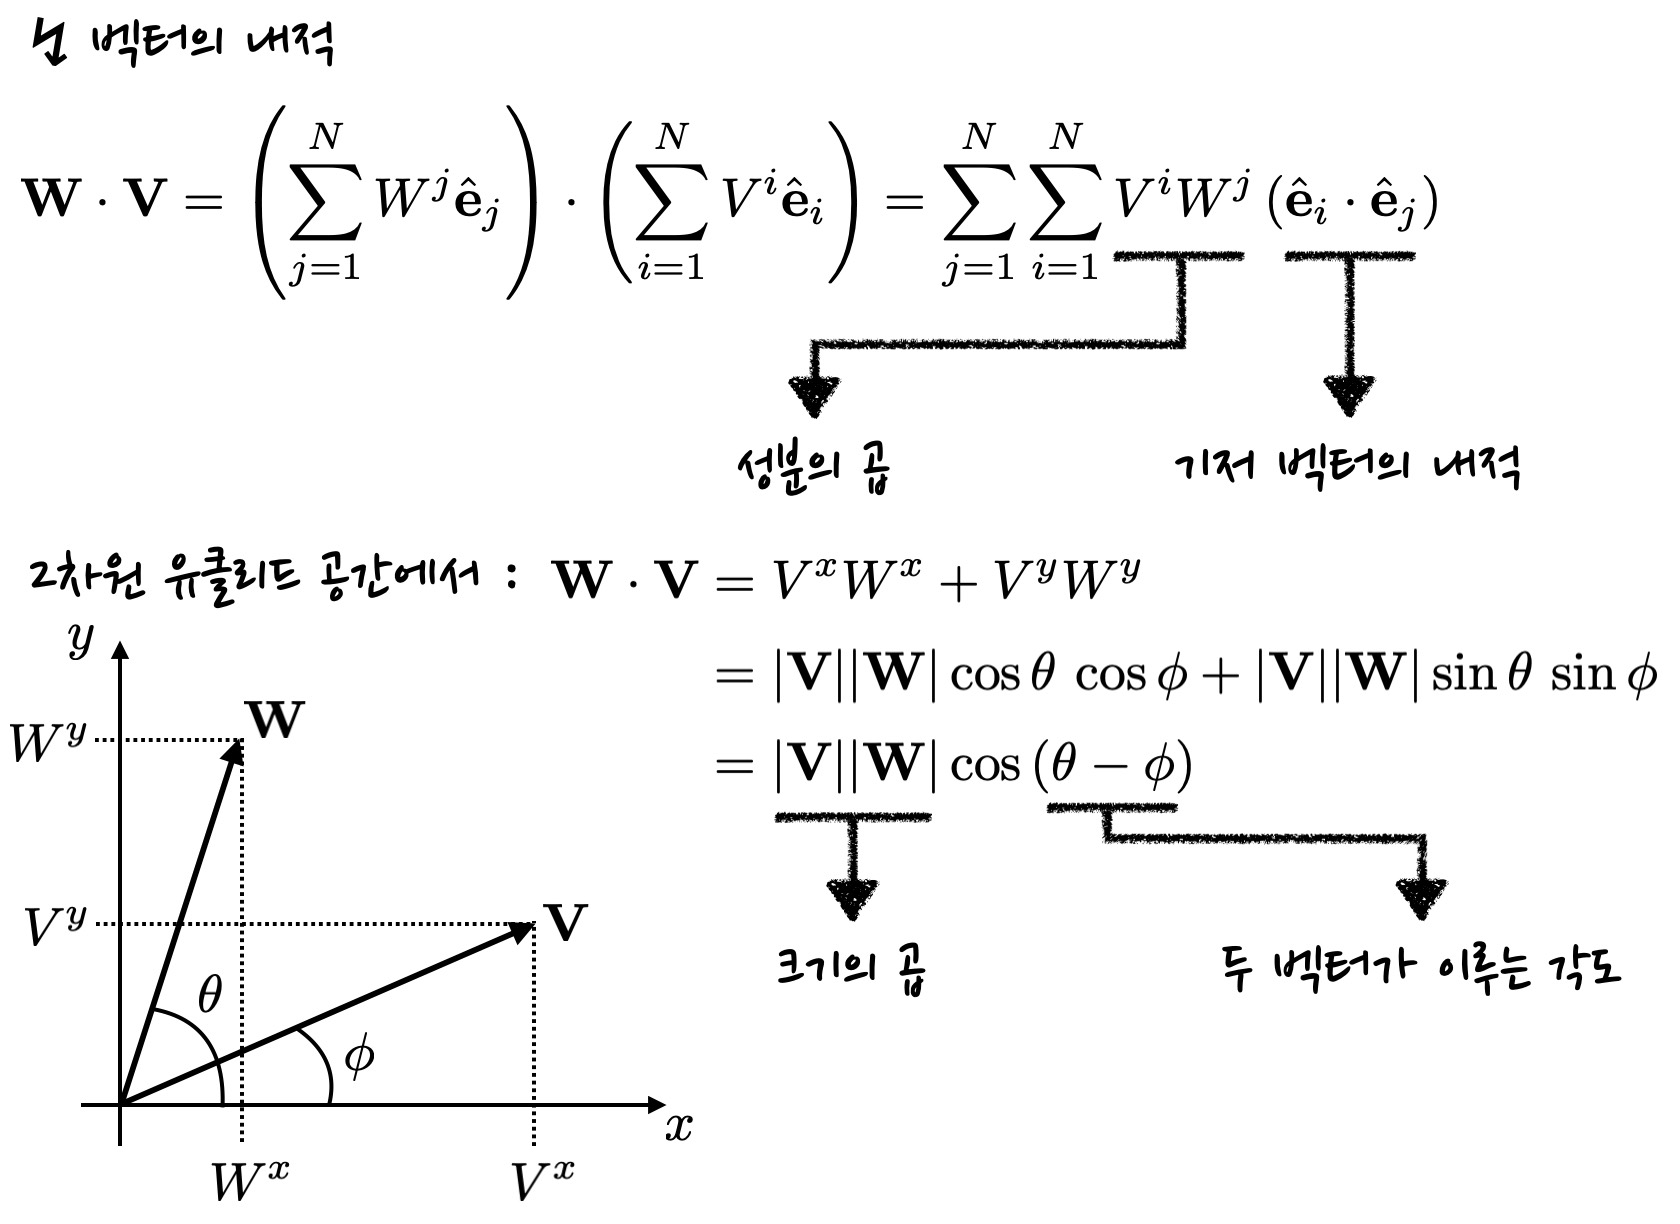 schematics of inner product of vectors. It shows how to write the inner product in terms of components of each vector. In the case of Euclidean space&#44; it is demonstrated that the inner product is product of length of vectors and cosine of the angle between two vectors.